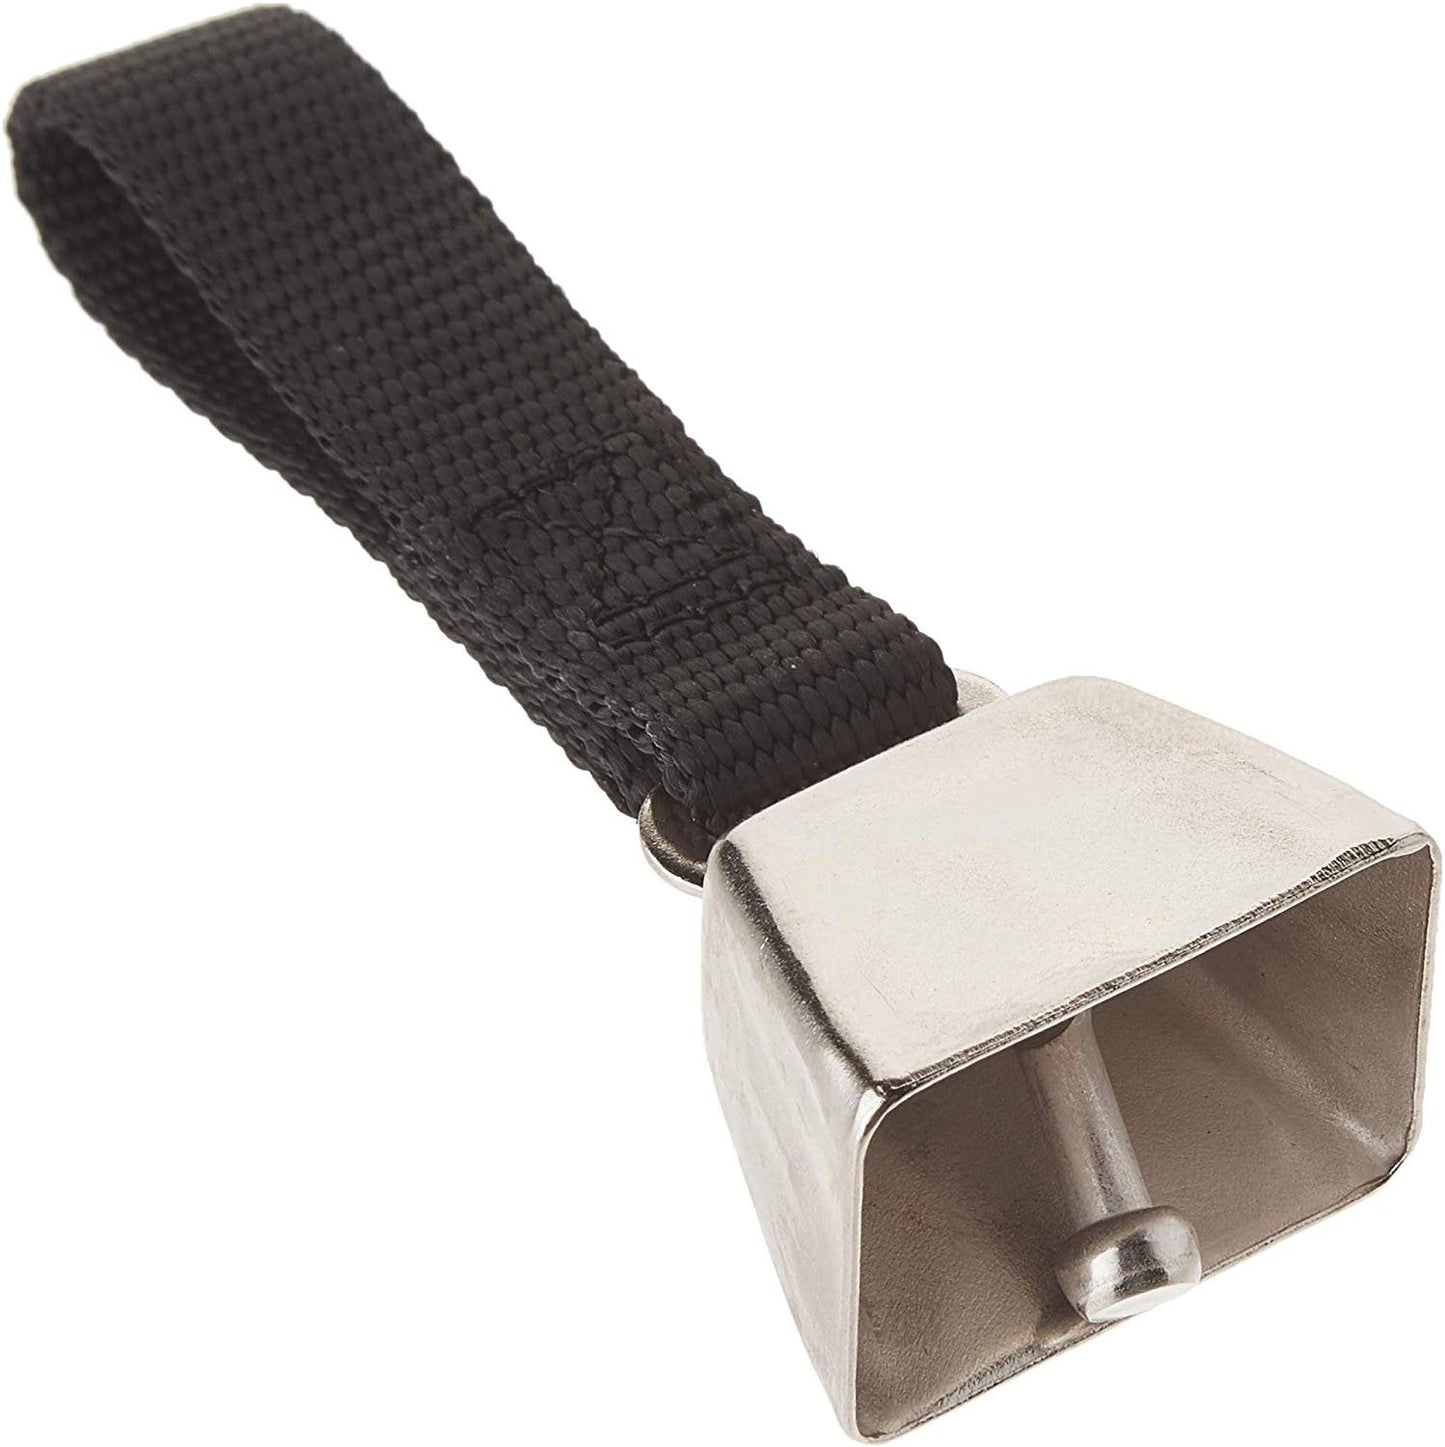 Remington® Nickel Cow Bell for Dogs Small Black - Kwik Pets